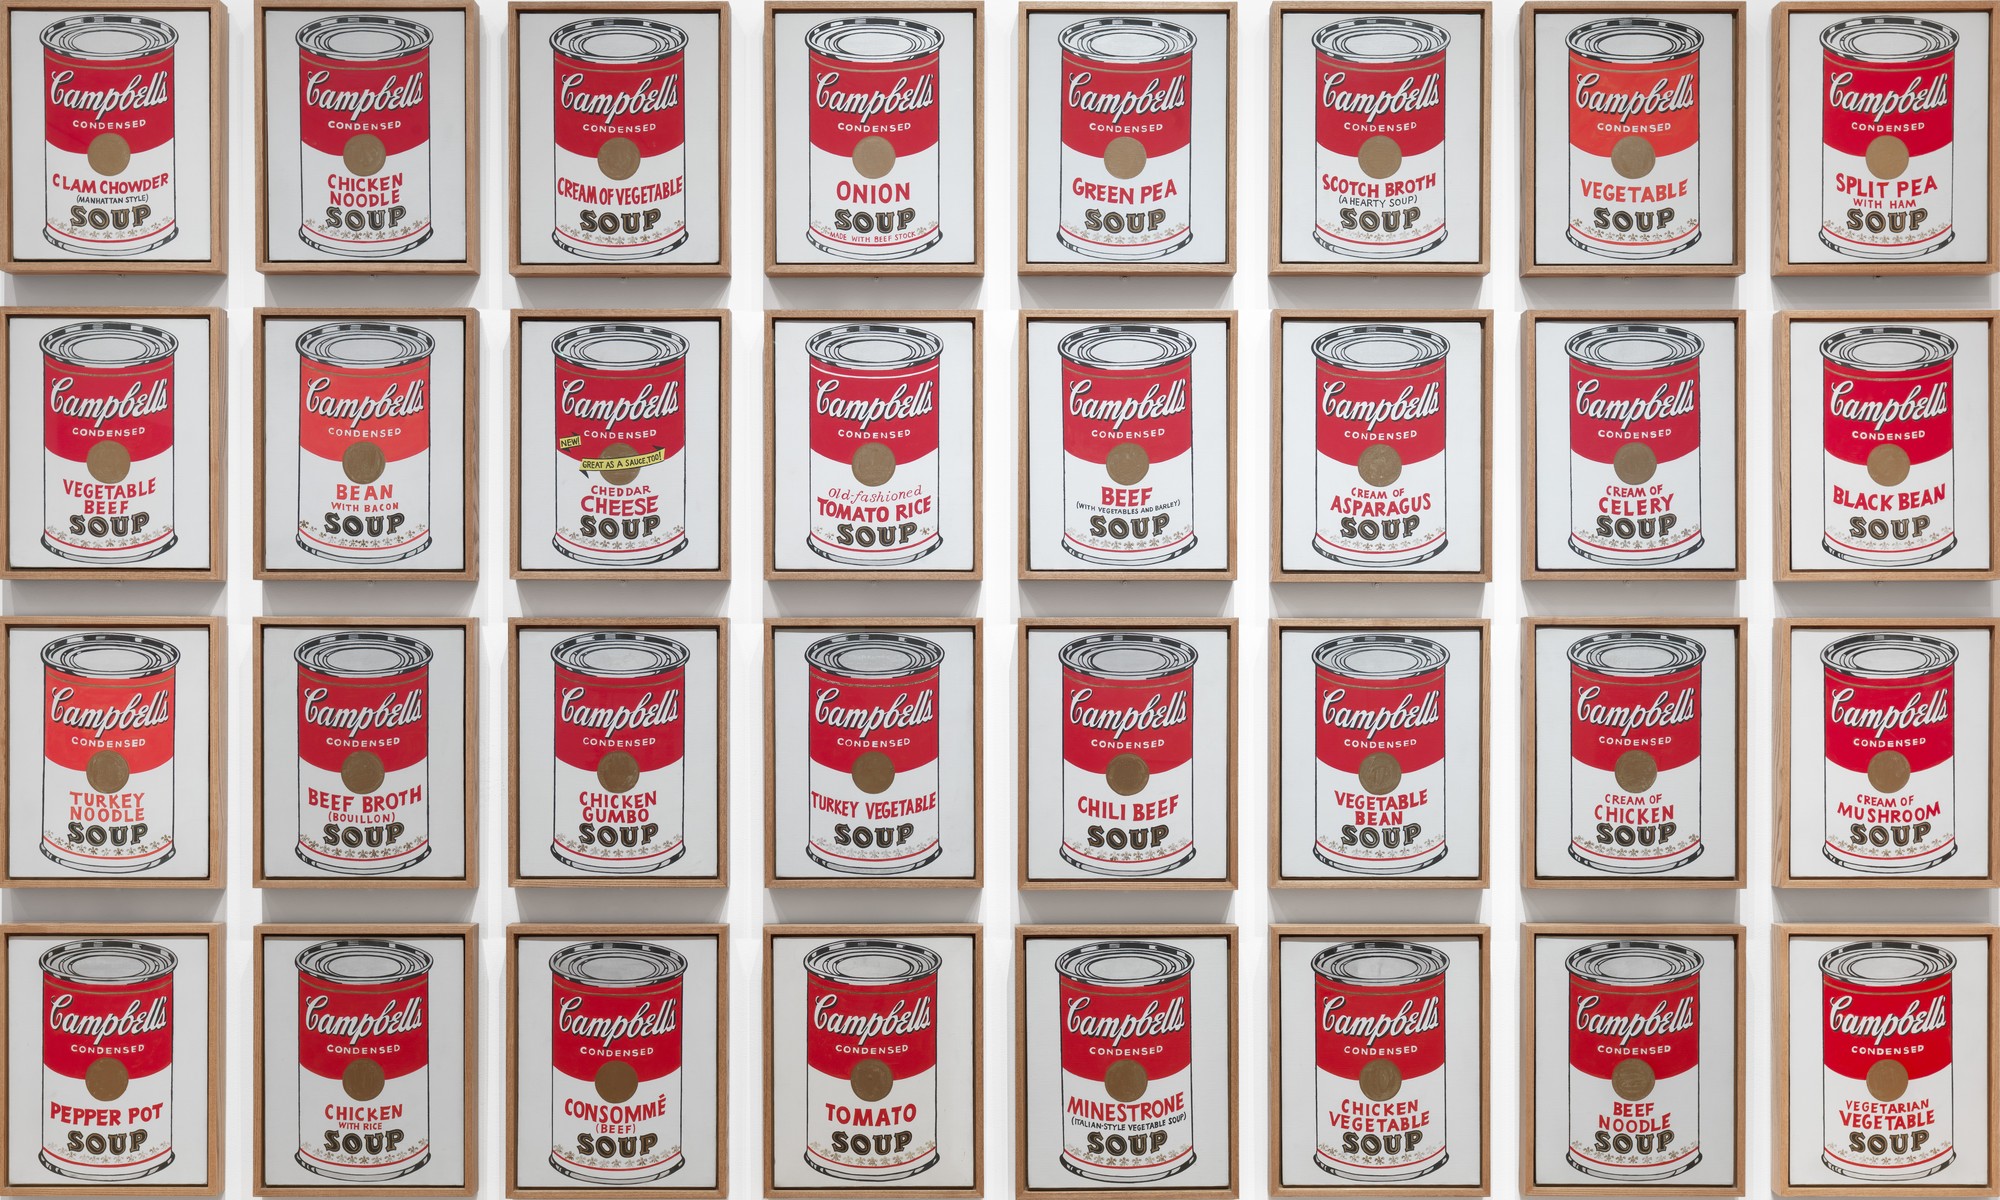 Andy Warhol's "Campbell's Soup Cans